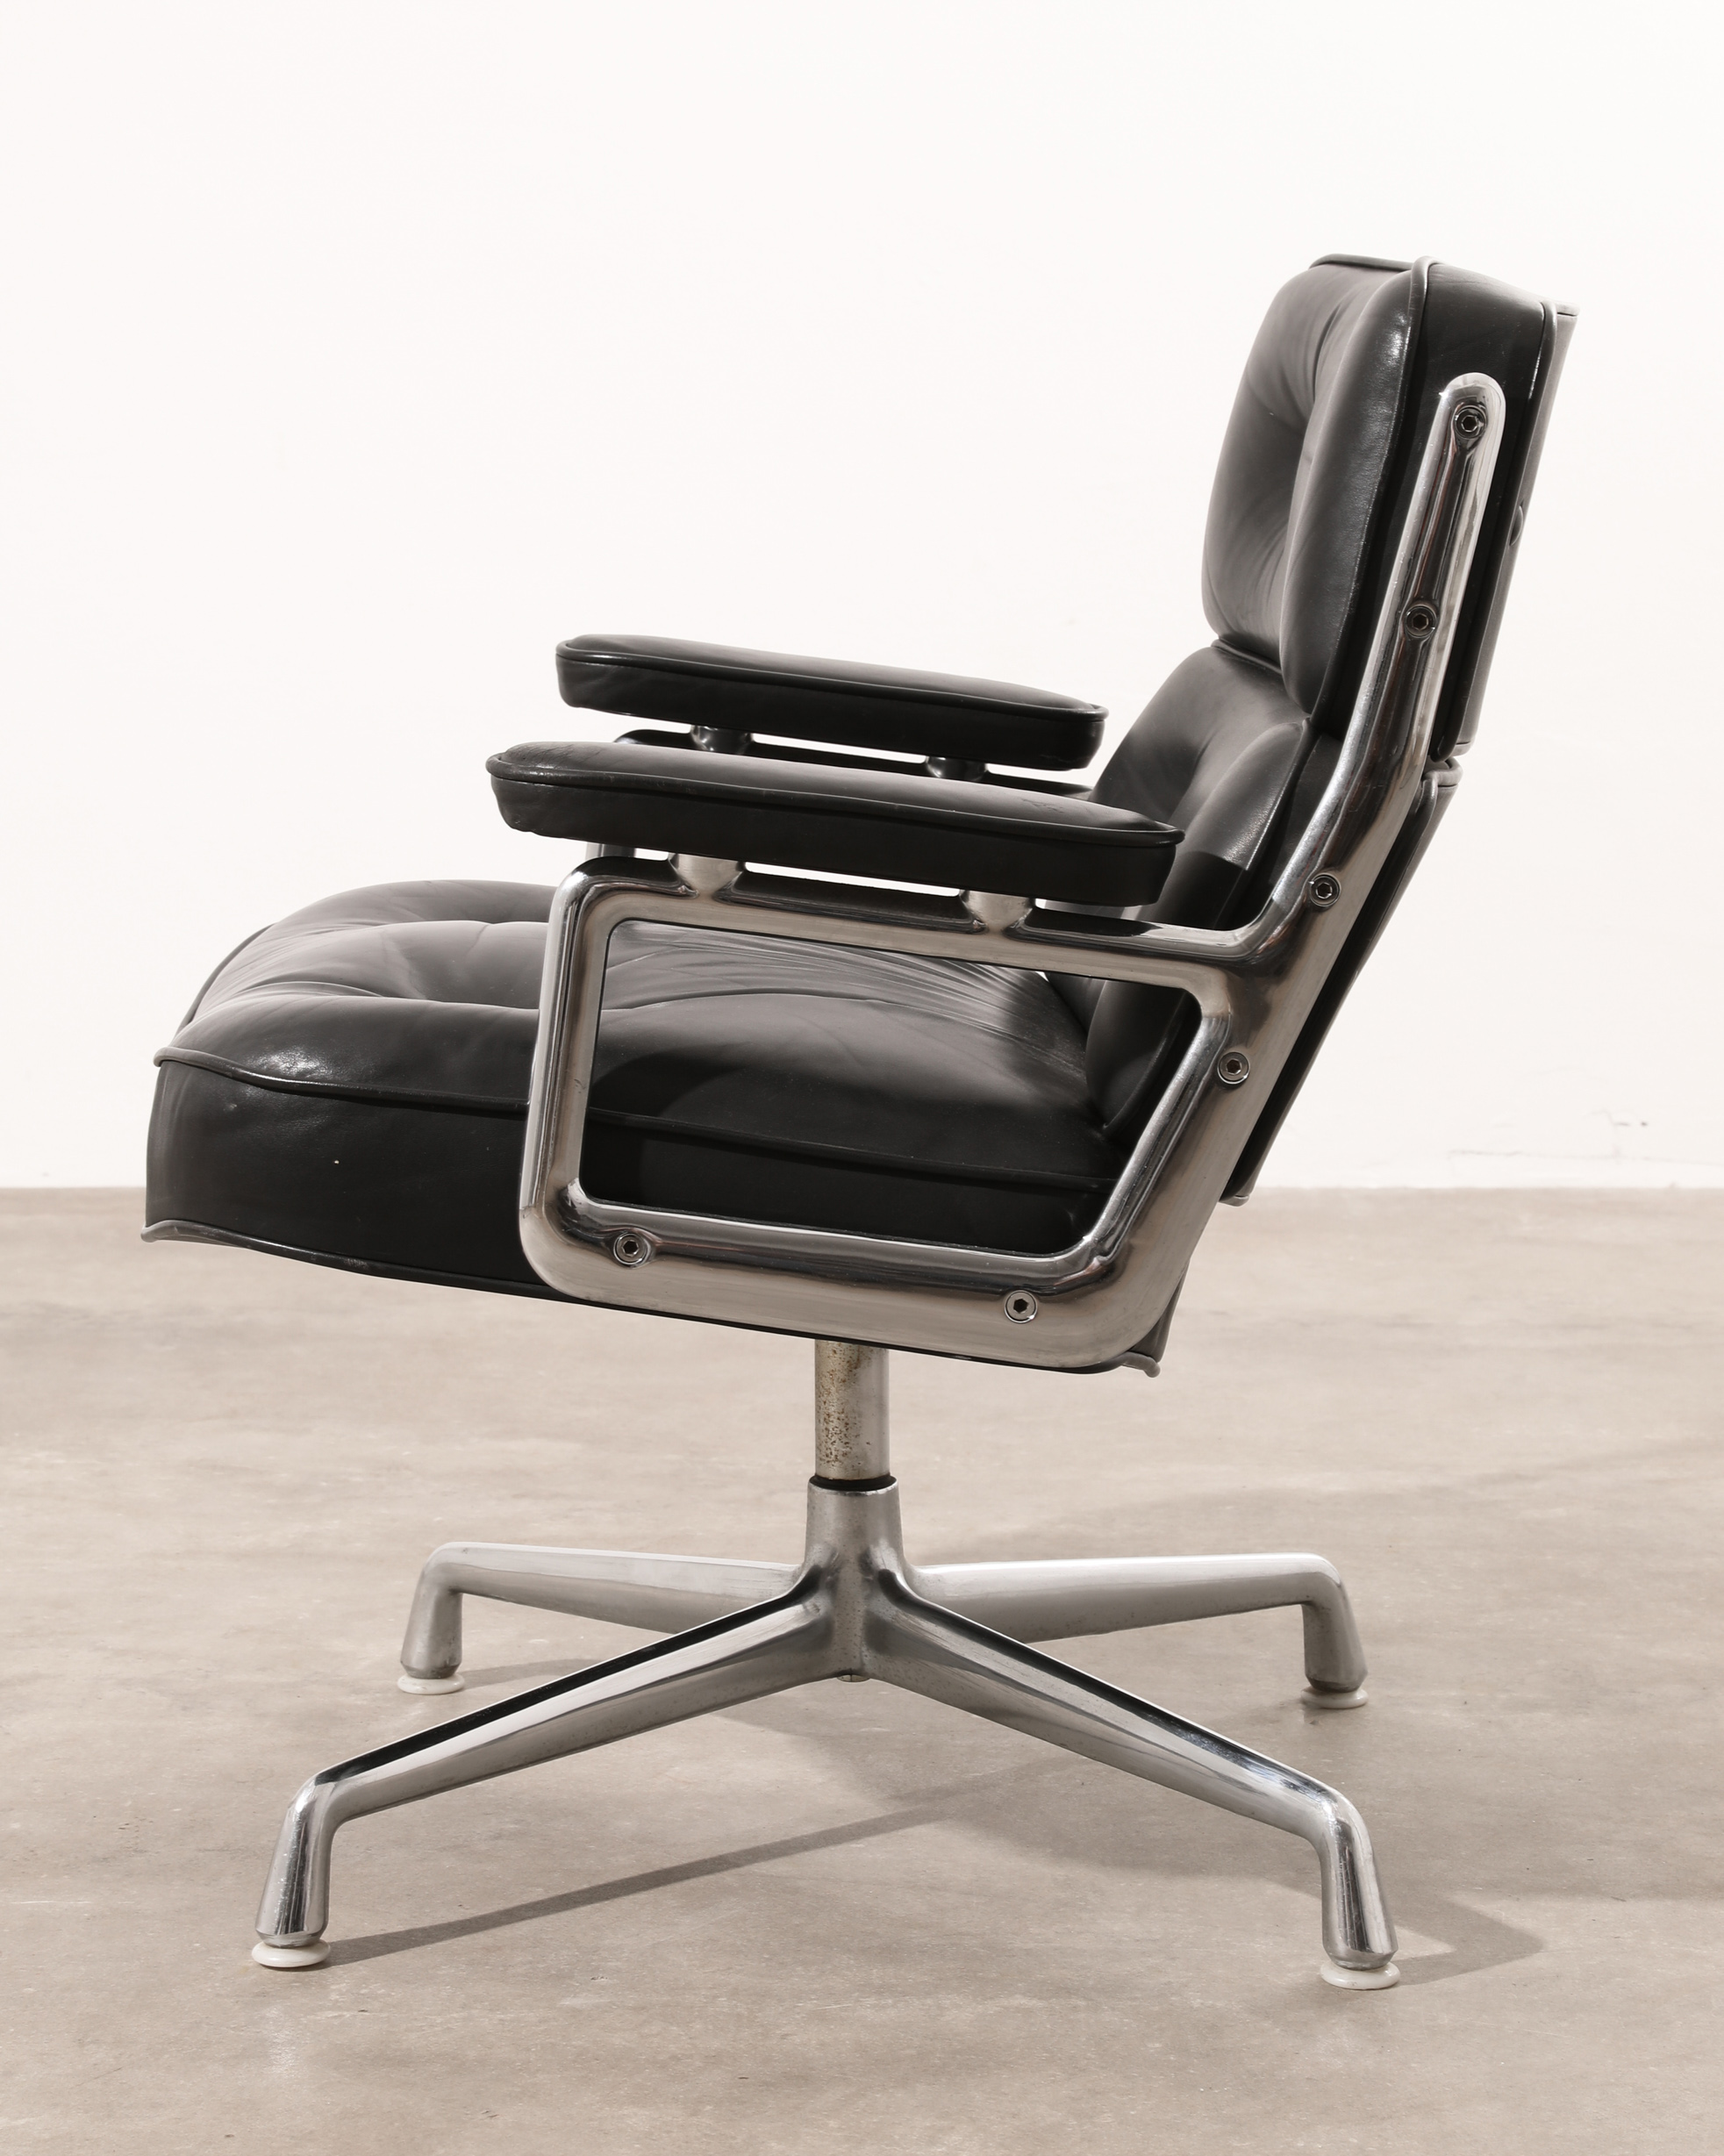 Charles & Ray Eames, Vitra, 4 Chairs, model Time Life Lobby Chair - Image 4 of 6